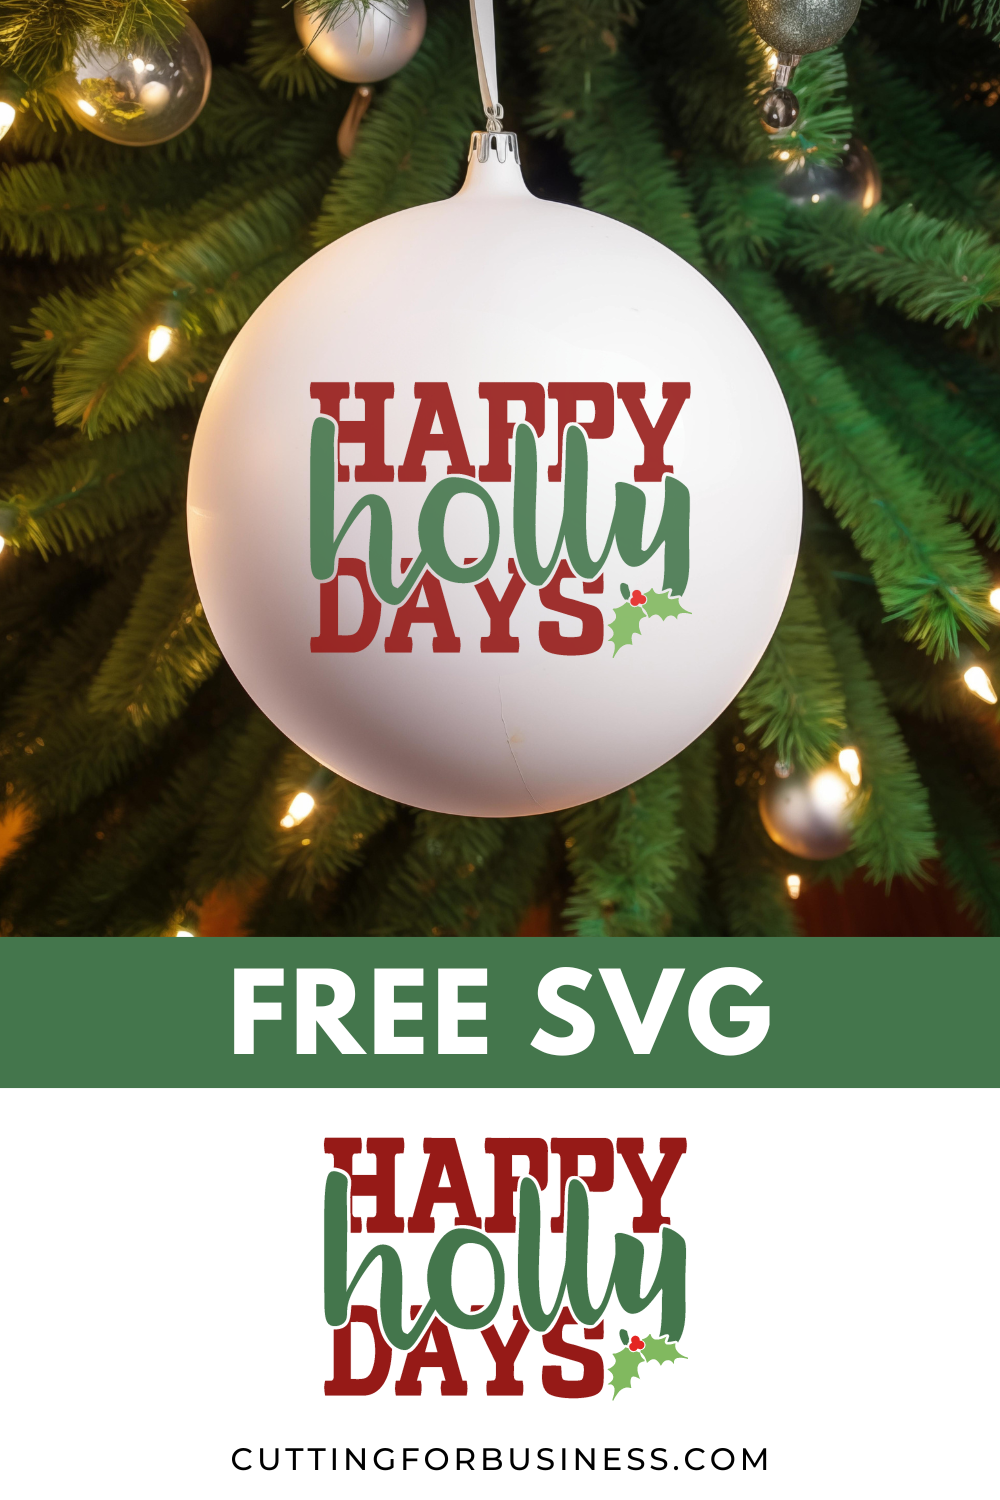 Free Christmas SVG - Happy Holly Days - cuttingforbusiness.com